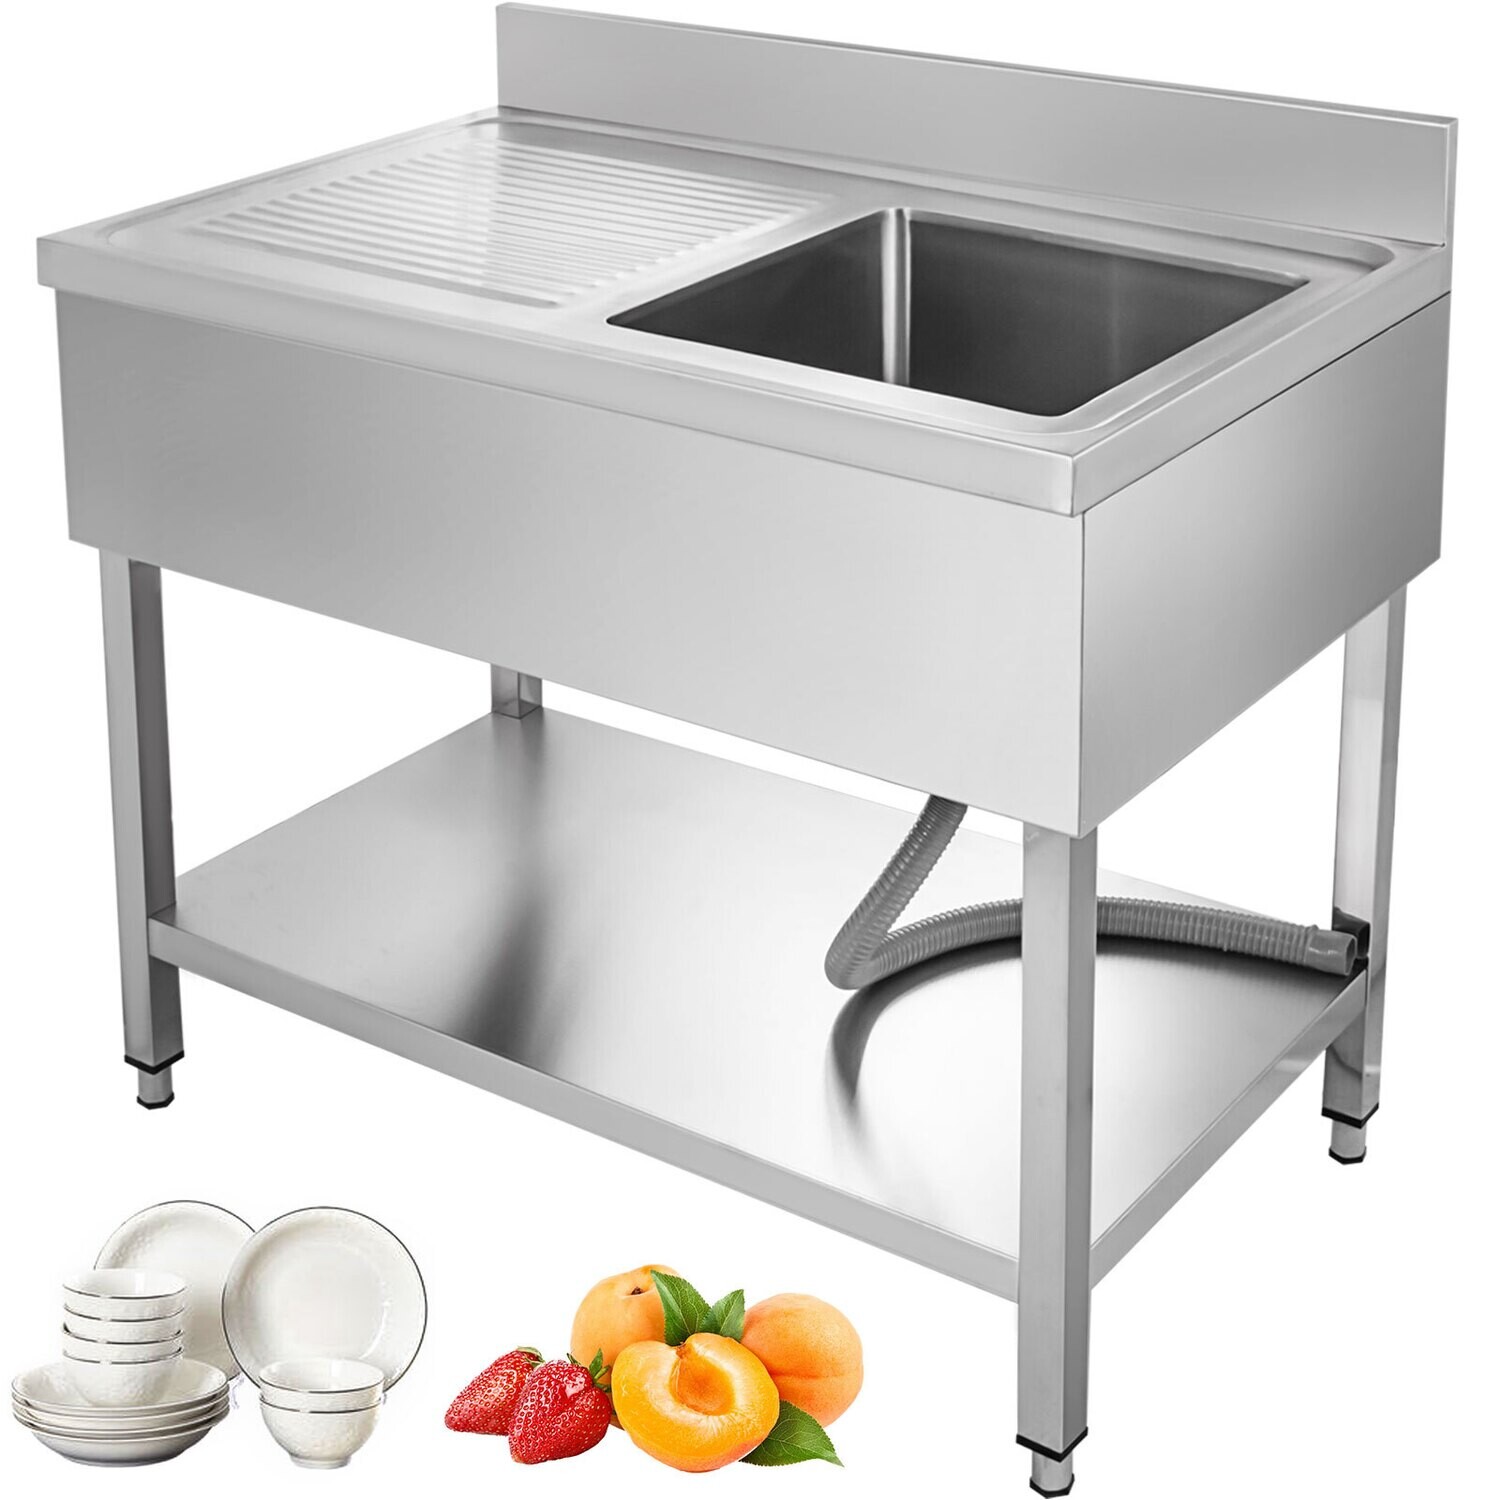 39.5 inch Stainless Steel Professional Utility Sink with Single Bowl Unit for Bar Kitchen & Restaurant